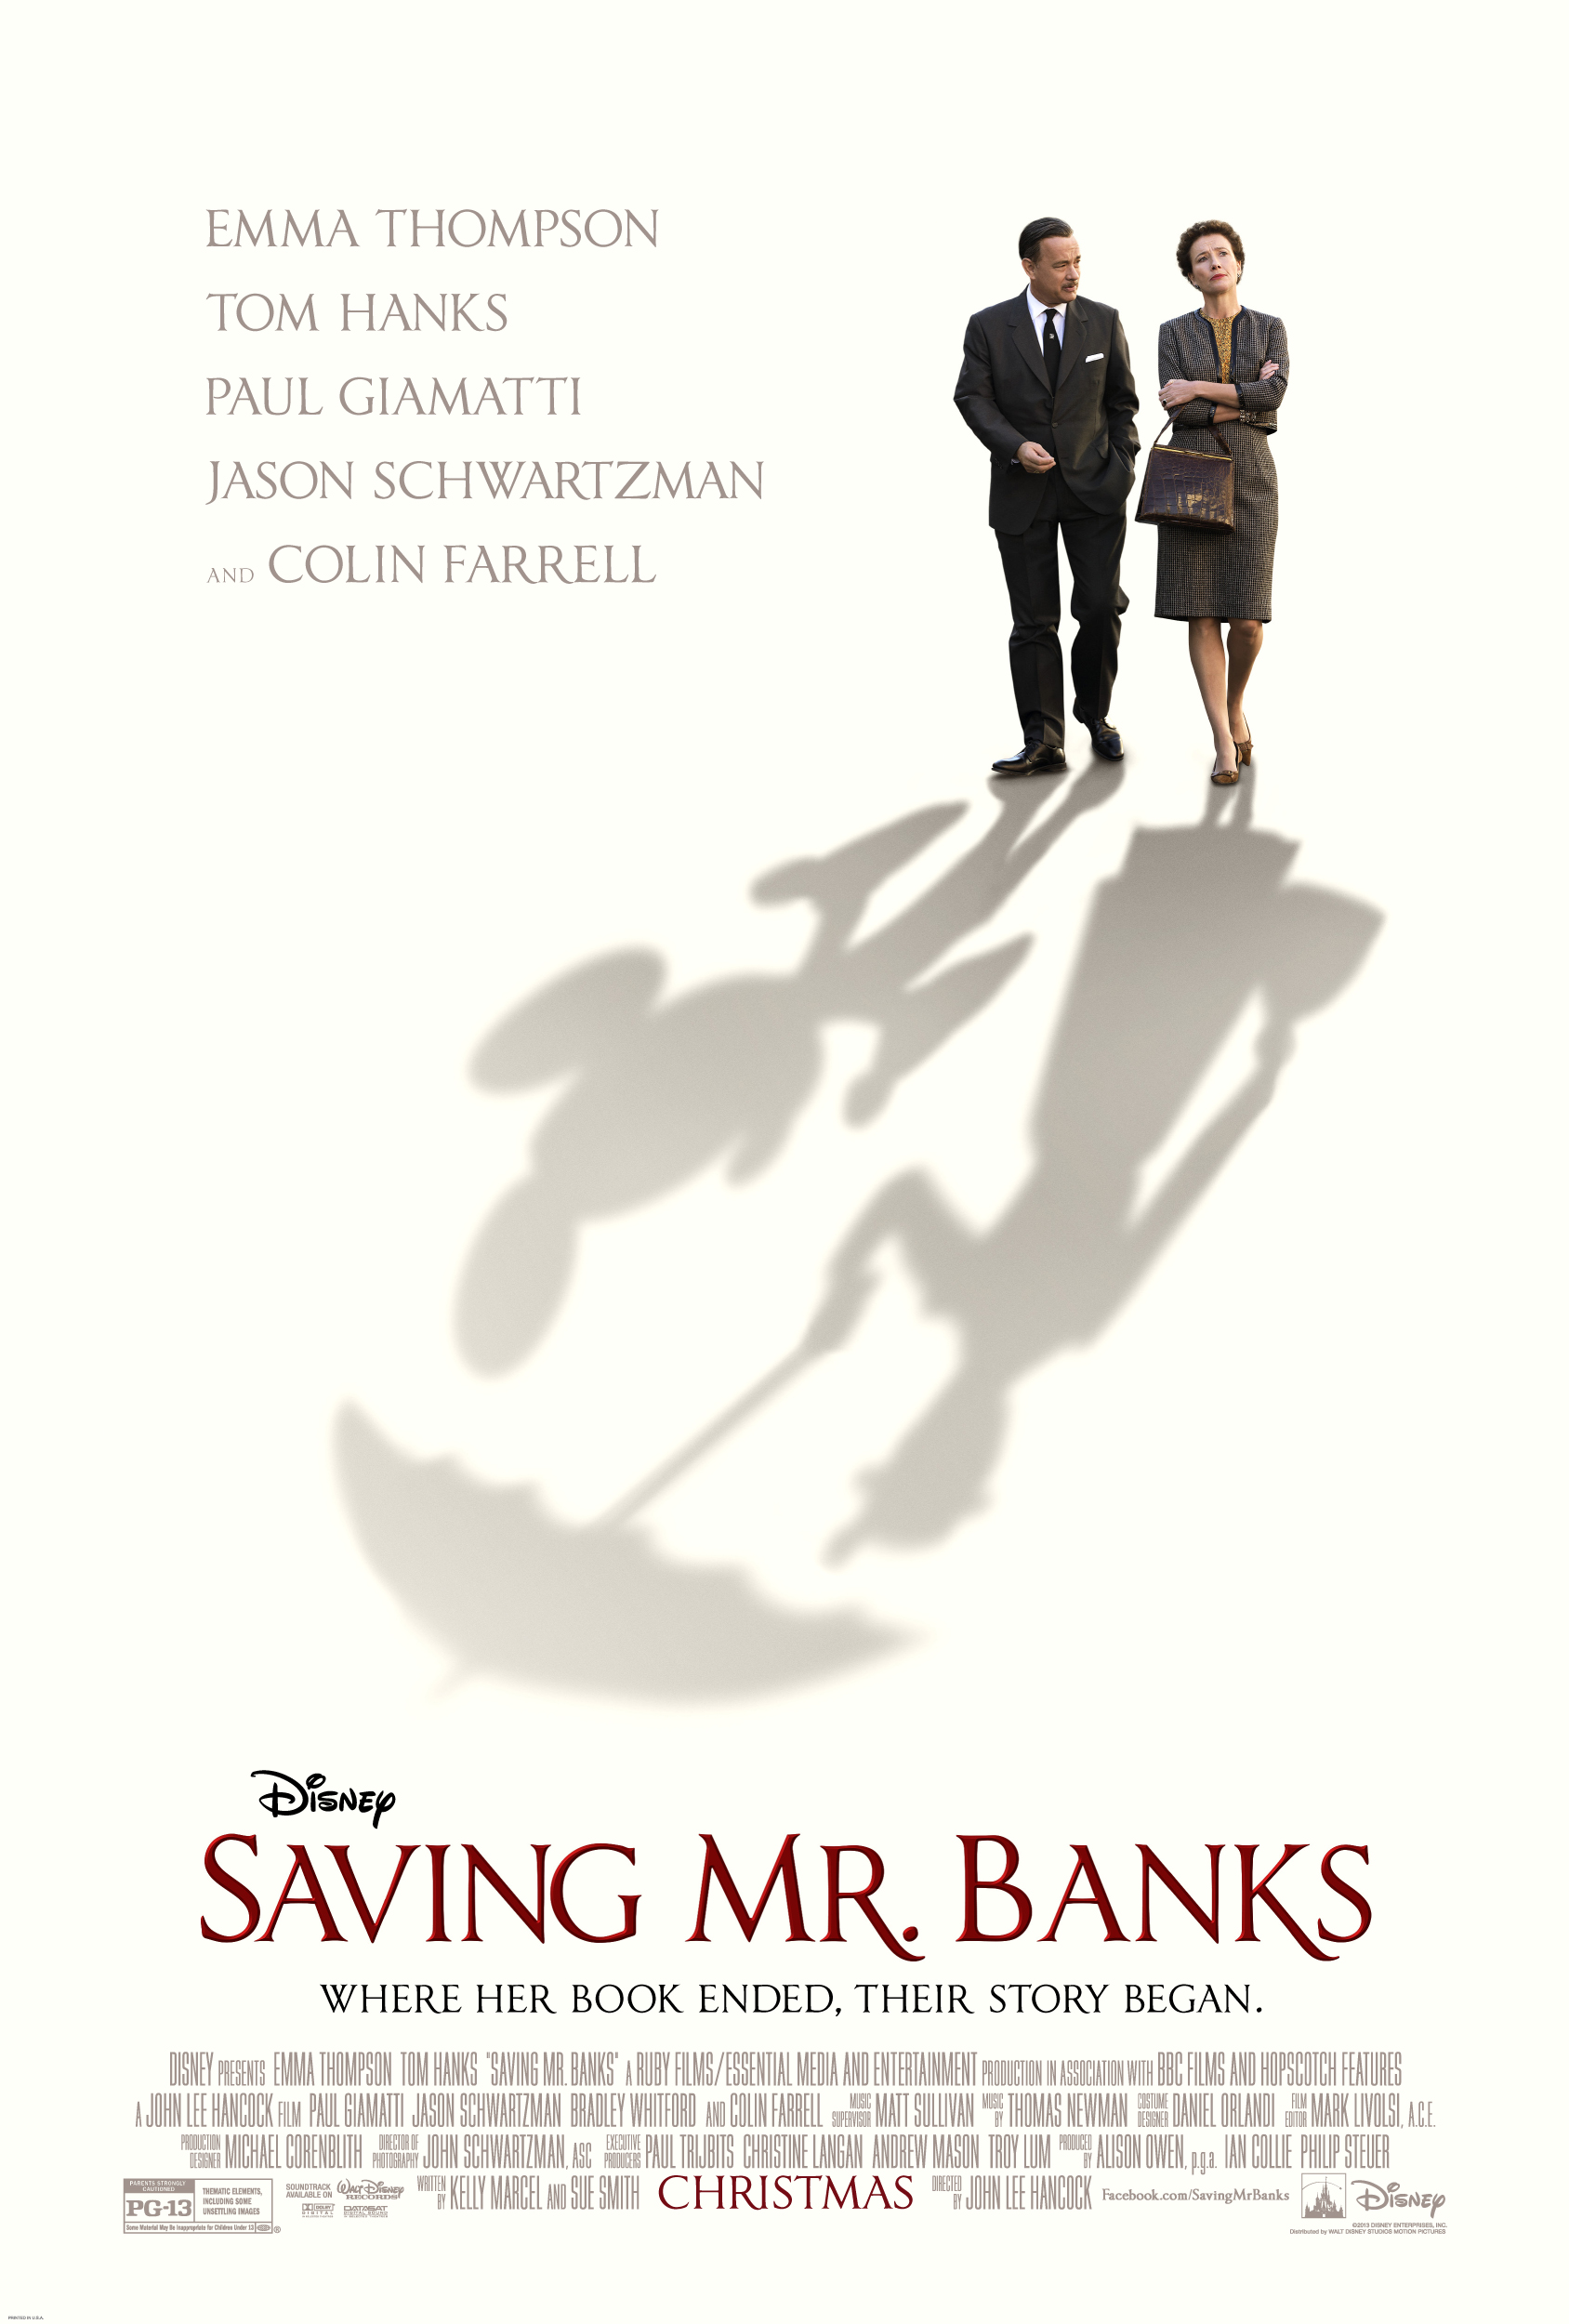 A Spoonful of Sugar – How Mary Poppins almost wasn’t a Disney Classic #SavingMrBanks